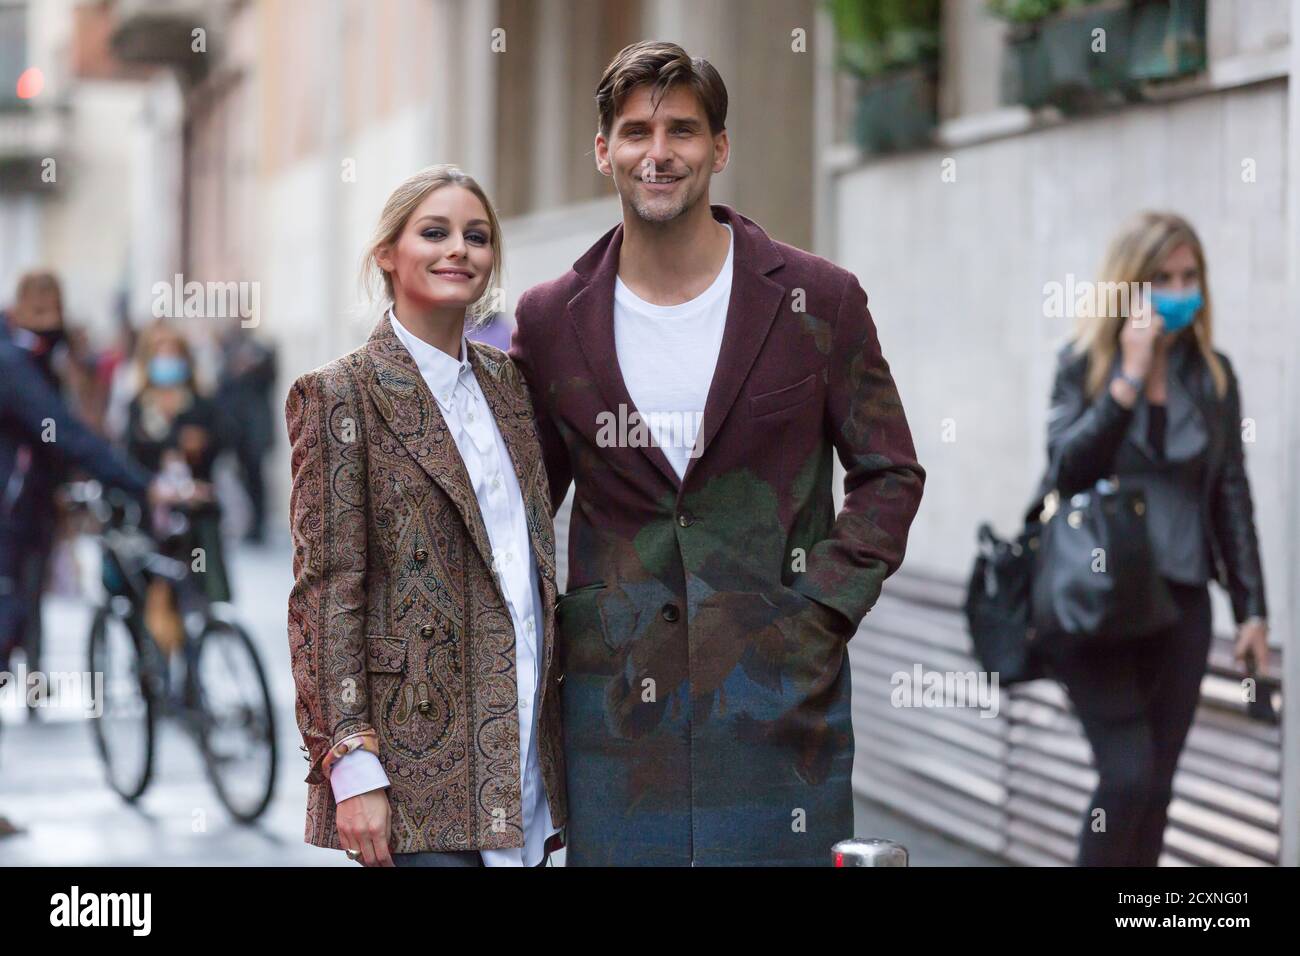 Photos and Pictures - Photo by: KGC-195/starmaxinc.com STAR MAX 2016 ALL  RIGHTS RESERVED Telephone/Fax: (212) 995-1196 6/7/16 Olivia Palermo and  Johannes Huebl at The Louis Vuitton Art Of Giving Love Ball at